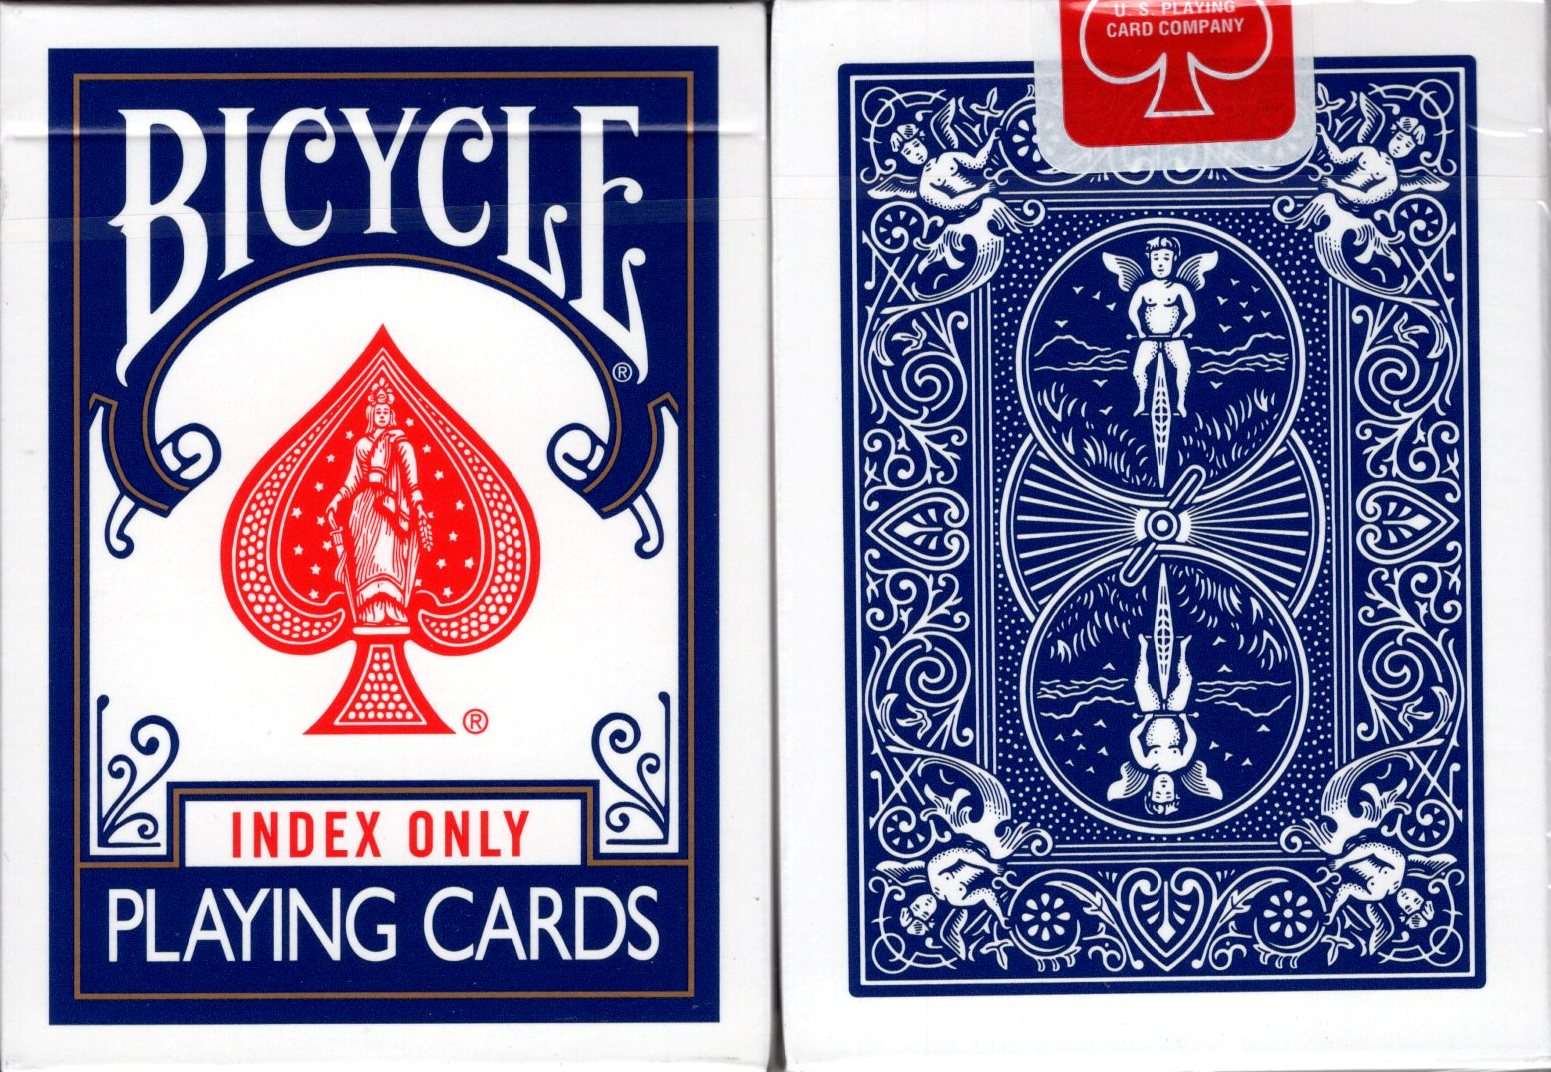 PlayingCardDecks.com-Index Only Bicycle Playing Cards: Blue Deck